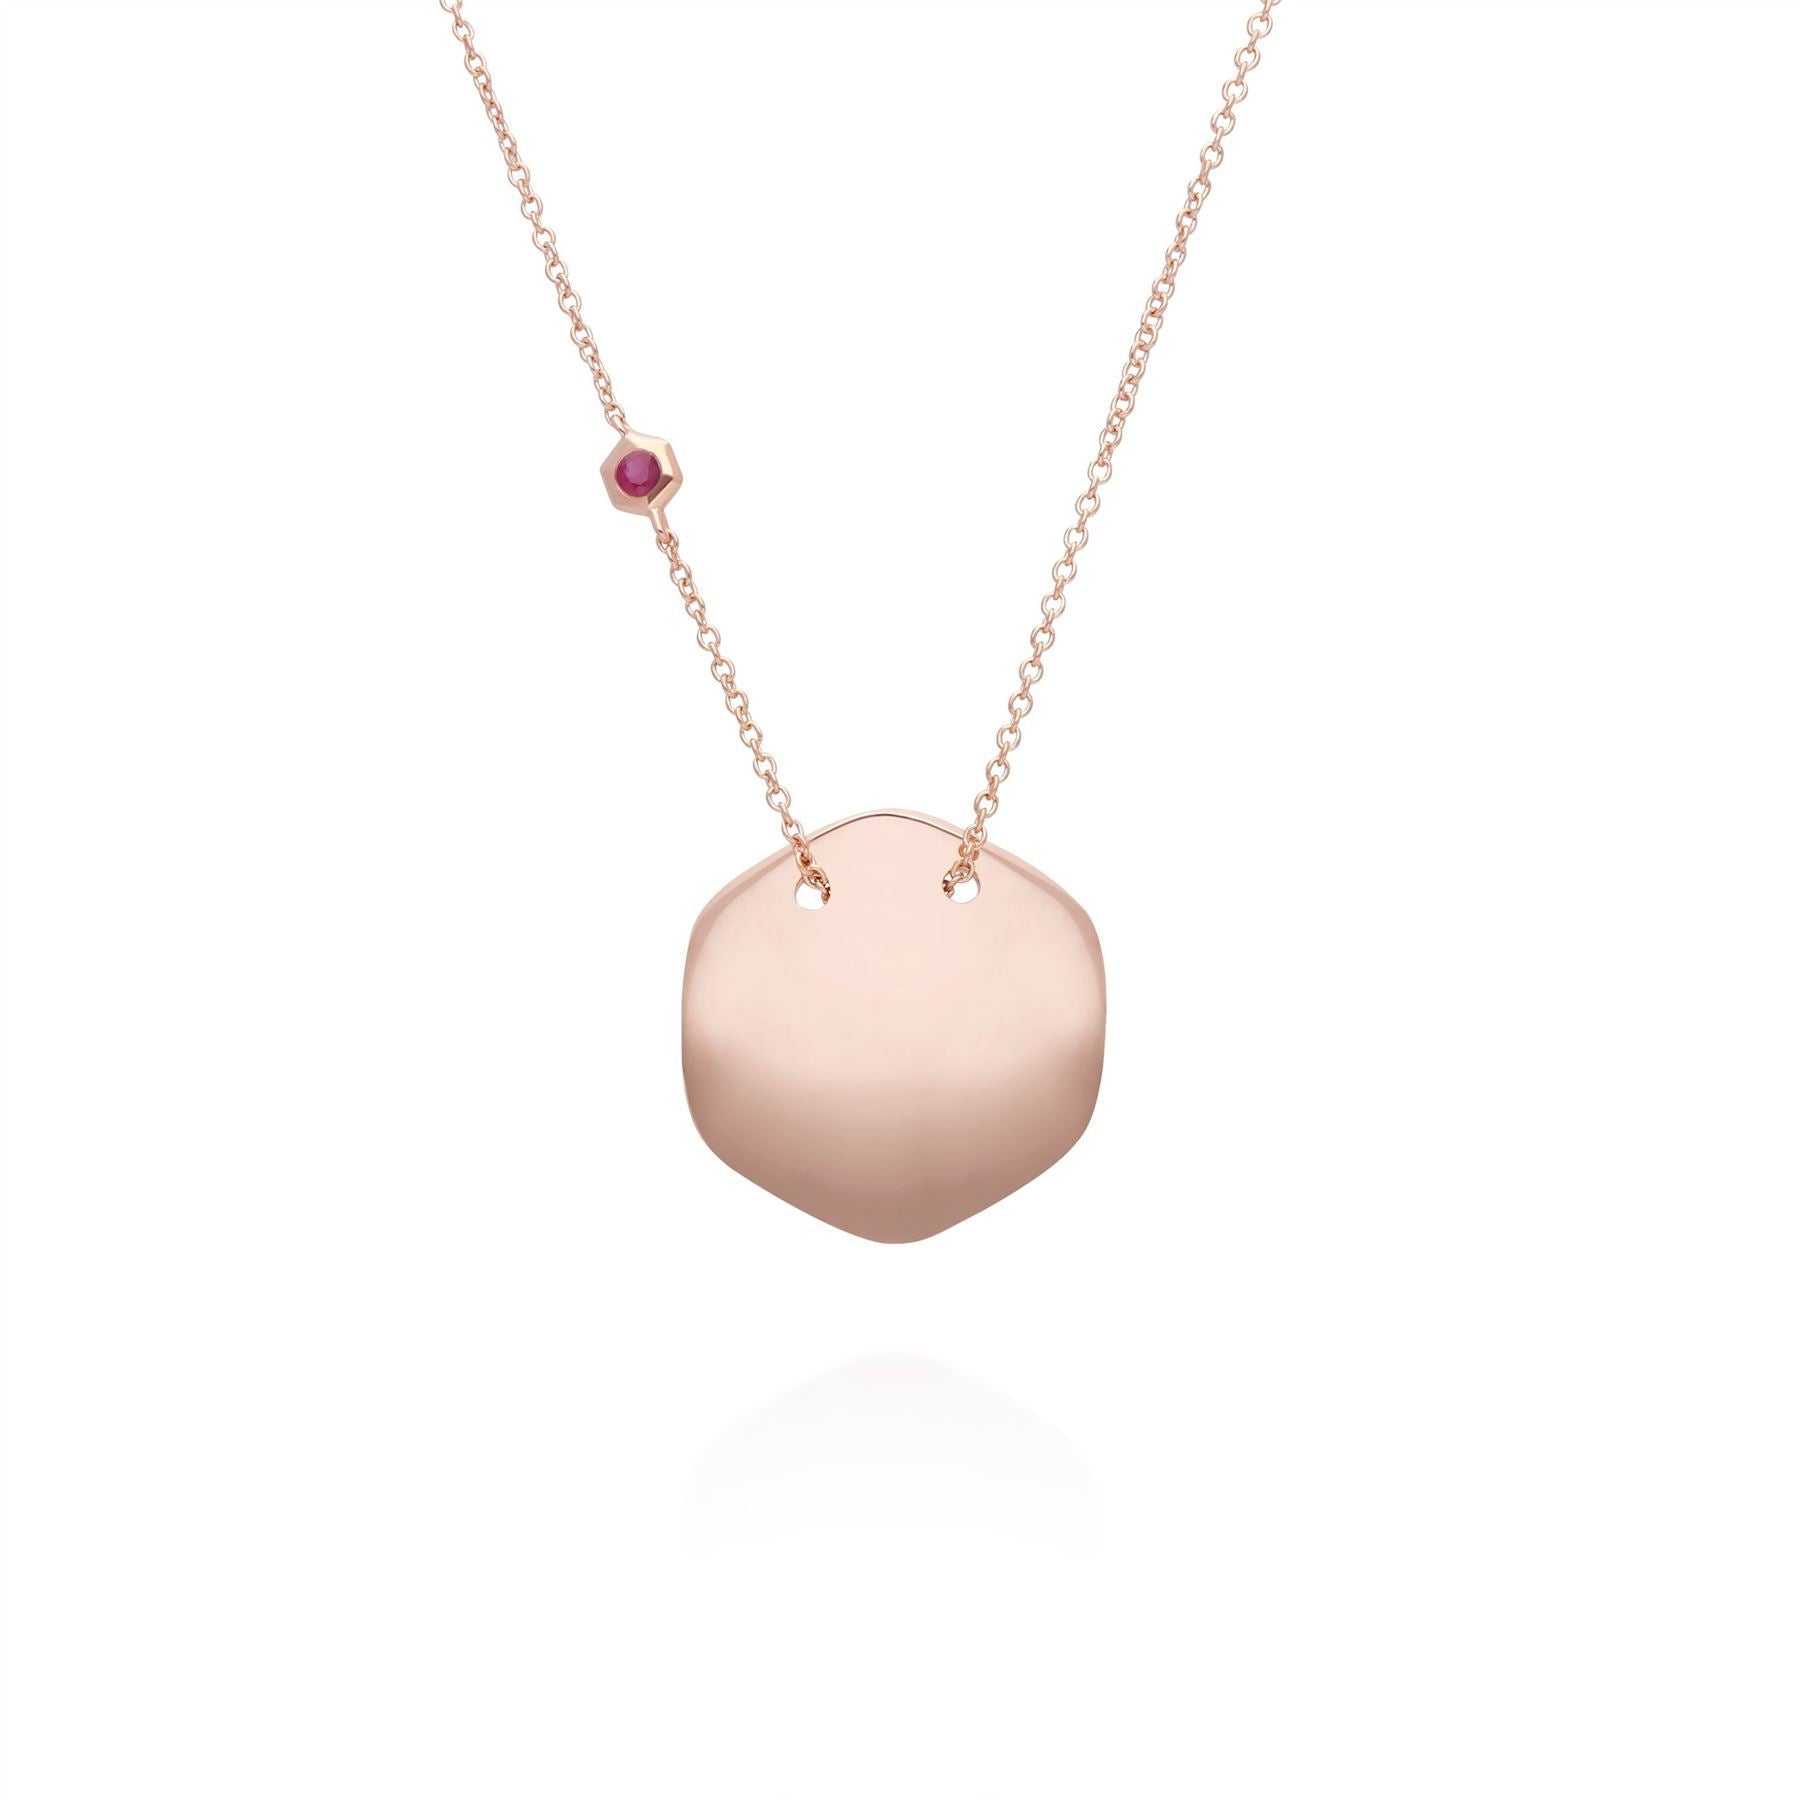 Ruby Engravable Necklace in Rose Gold Sterling Silver